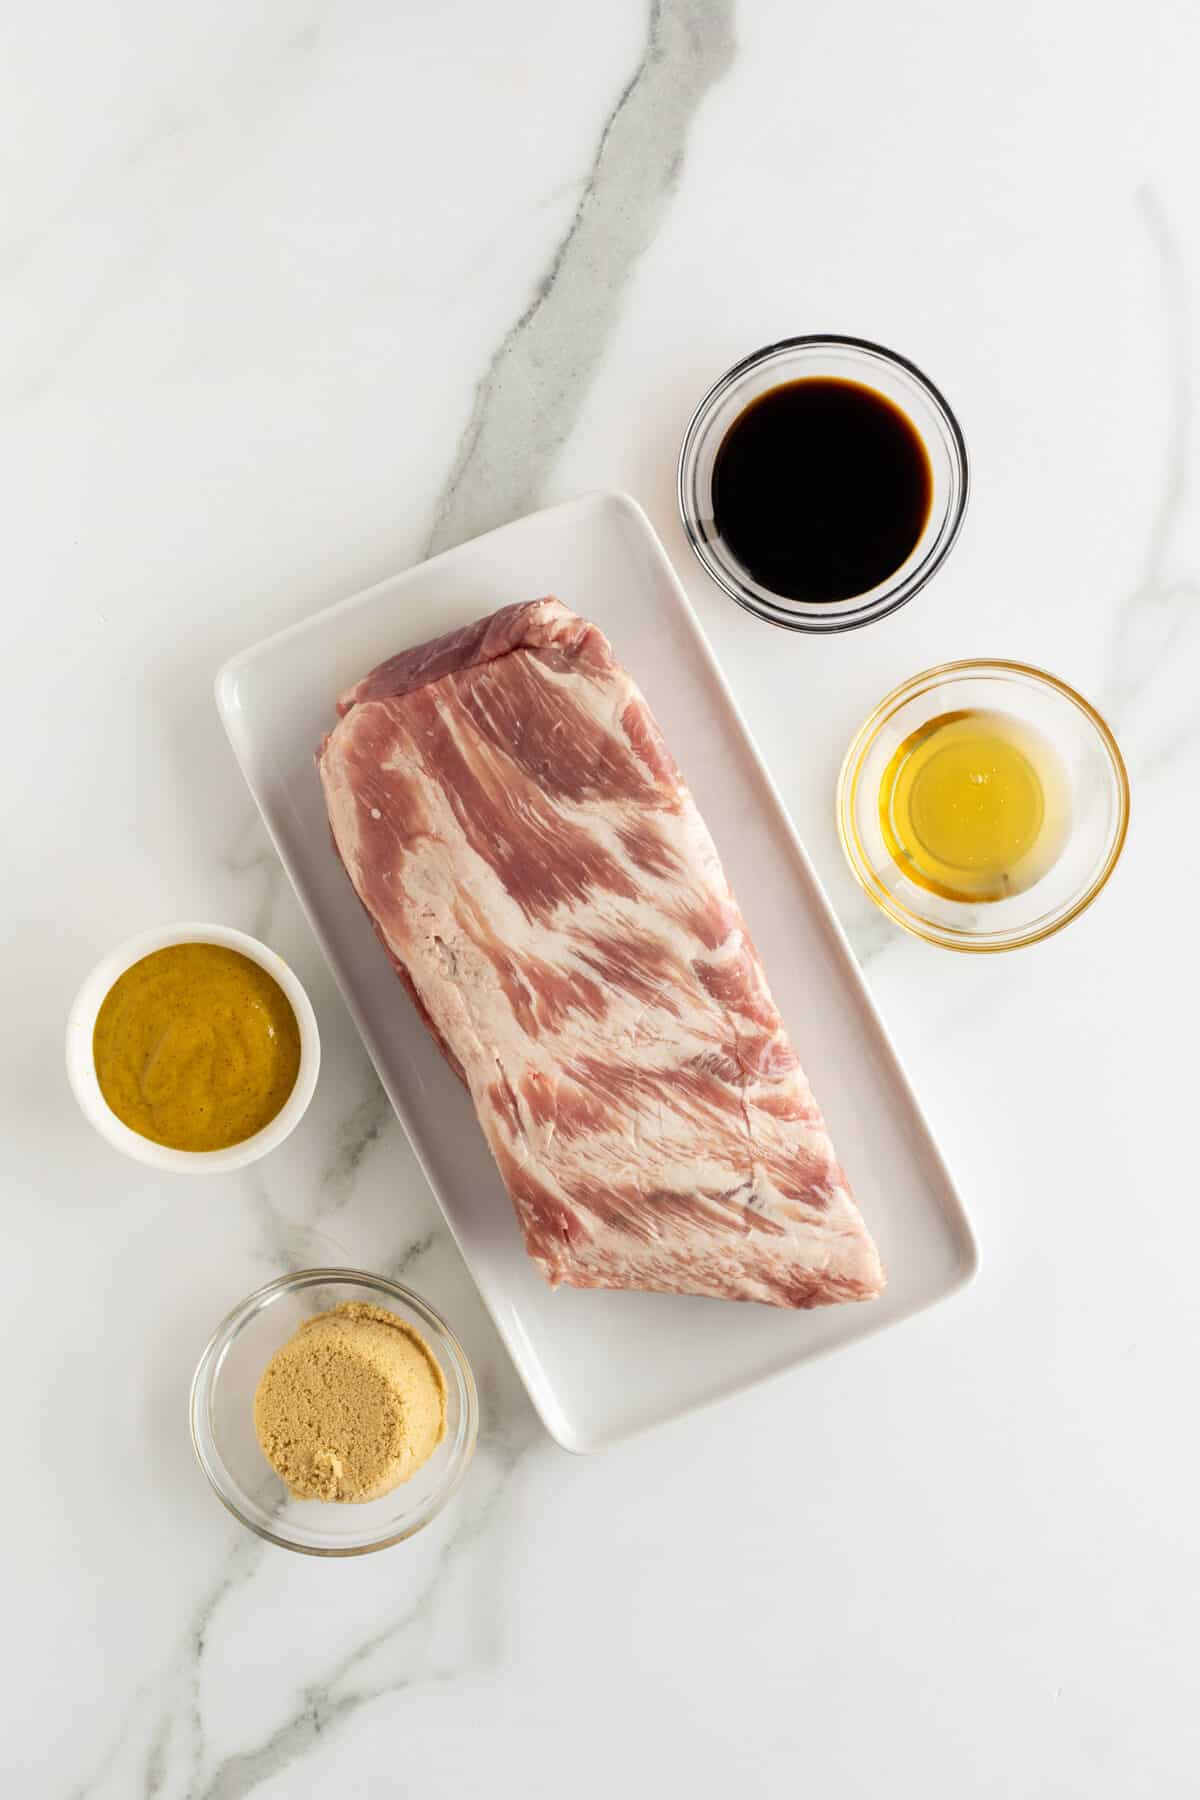 honey mustard glazed ribs ingredients in small clear bowls beside a rack of raw ribs